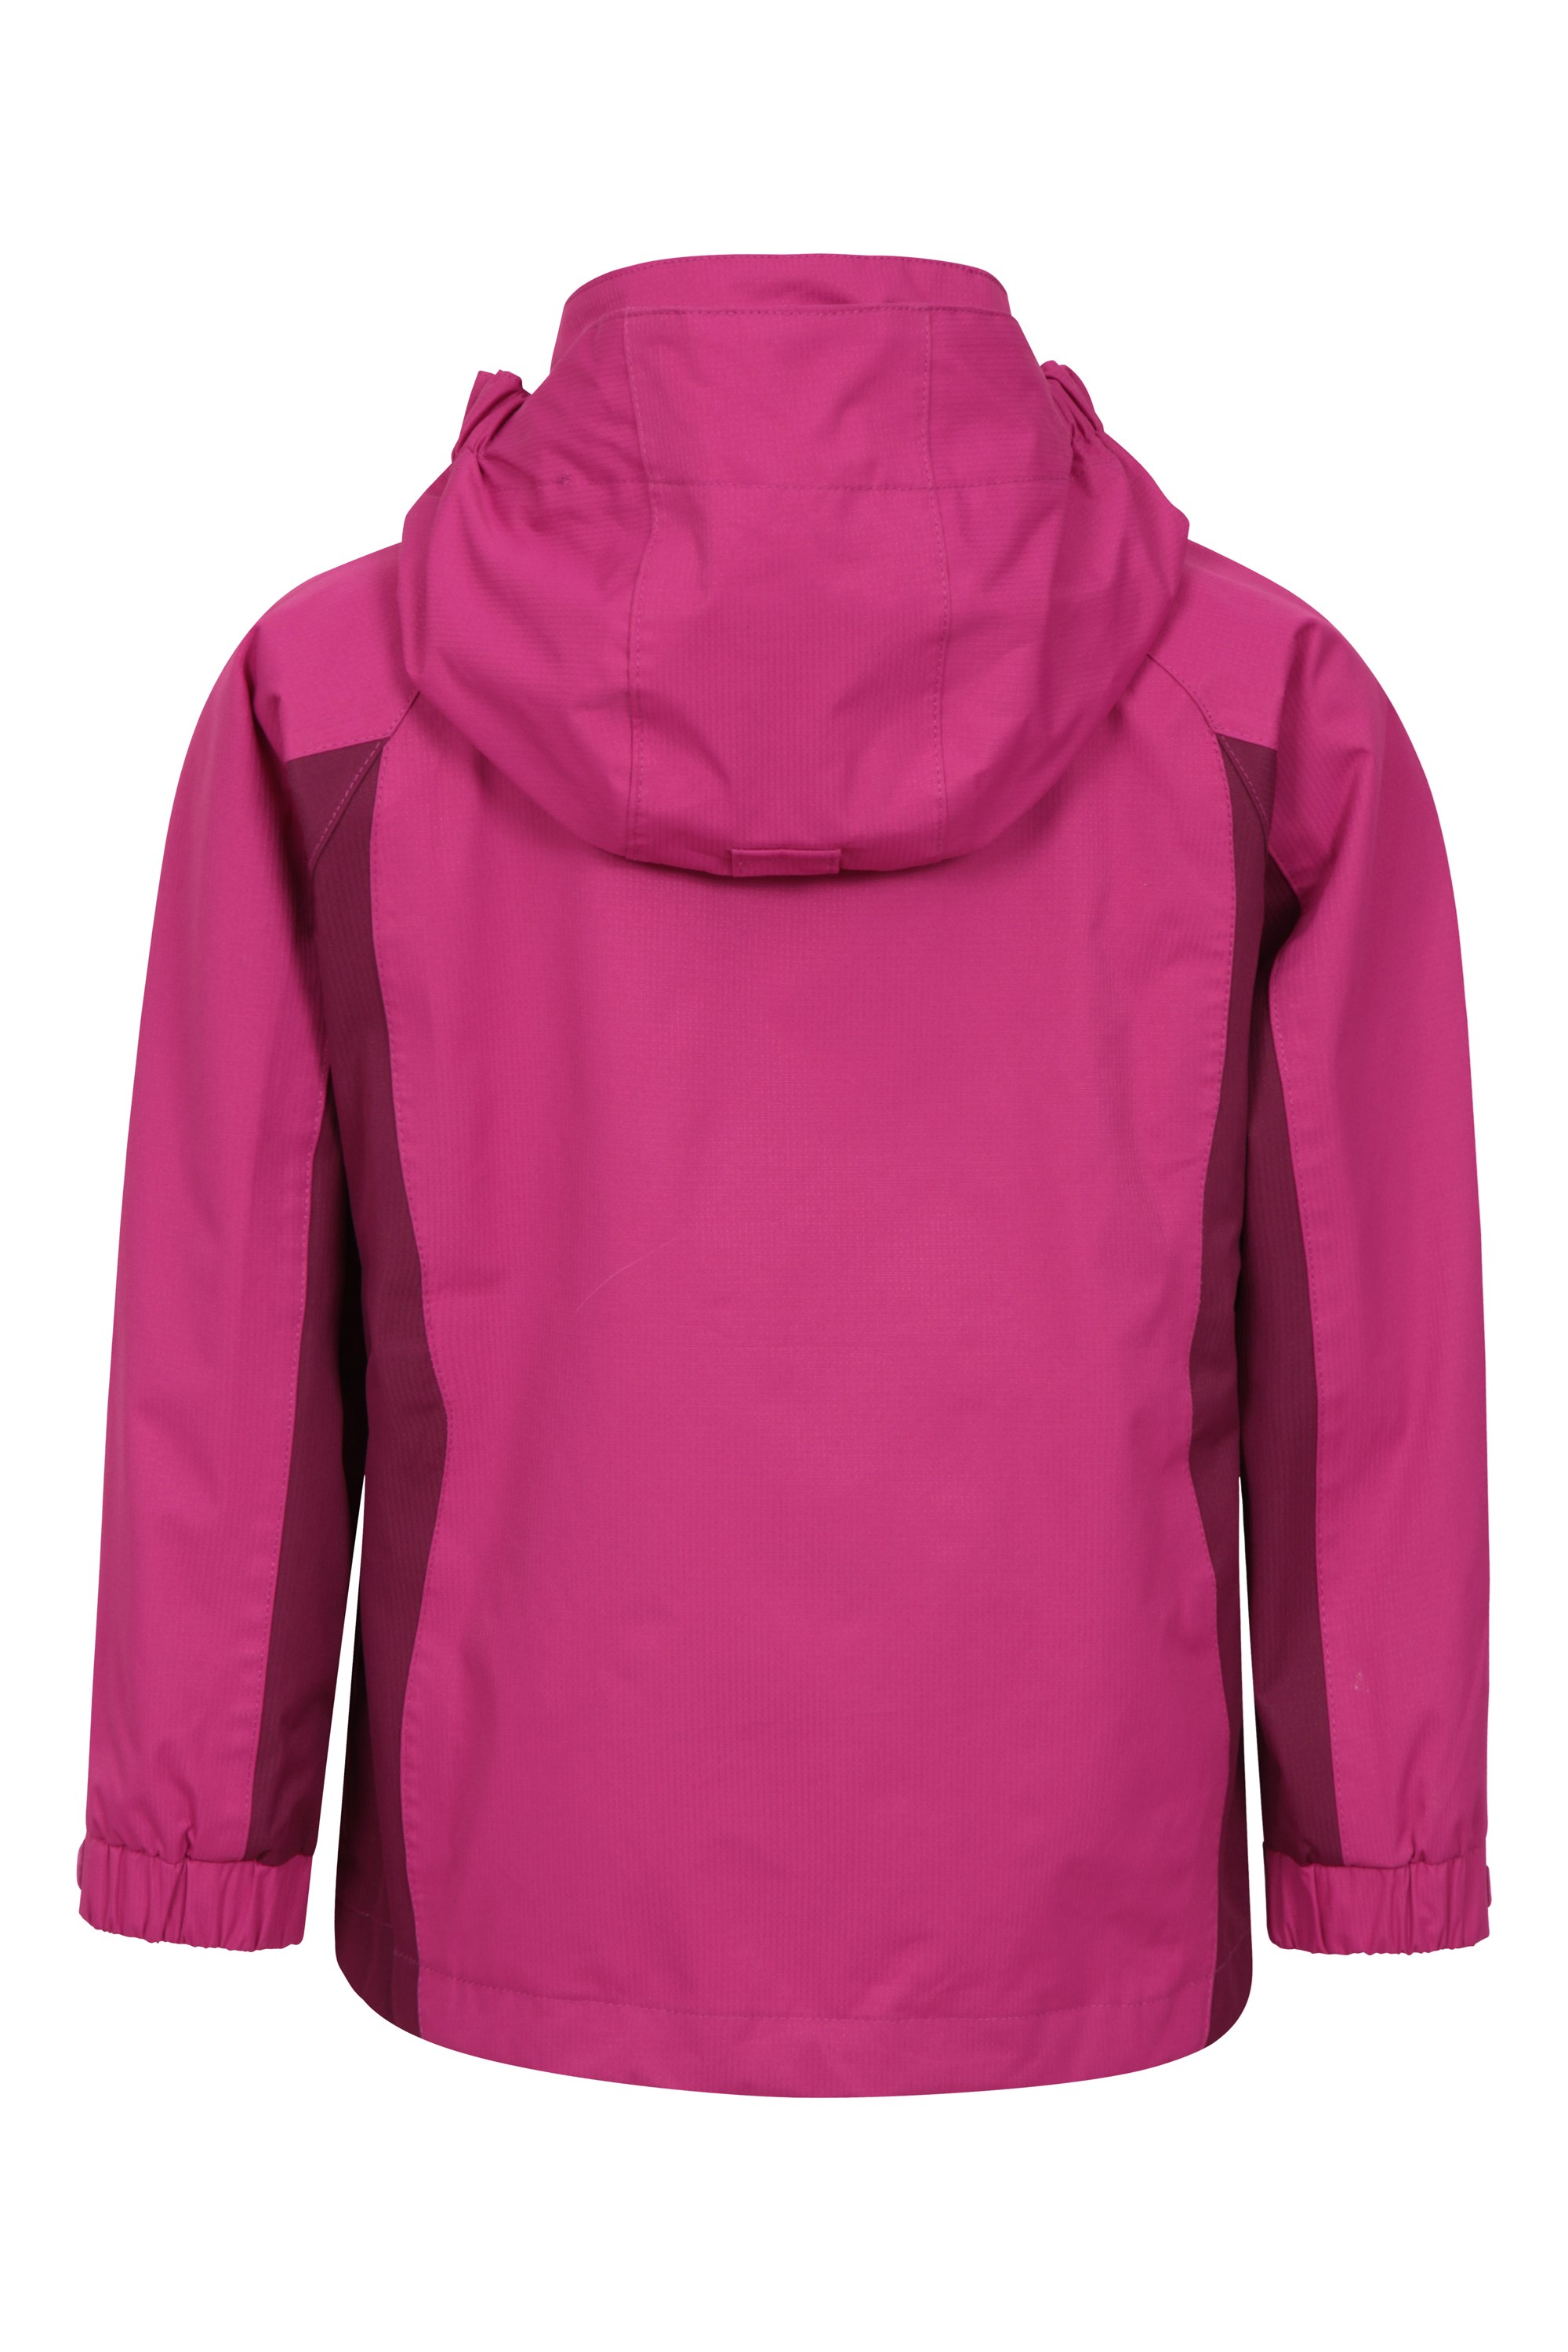 Mountain Warehouse Shelly 2 Kids Jacket with Adjustable Cuffs & Pockets 